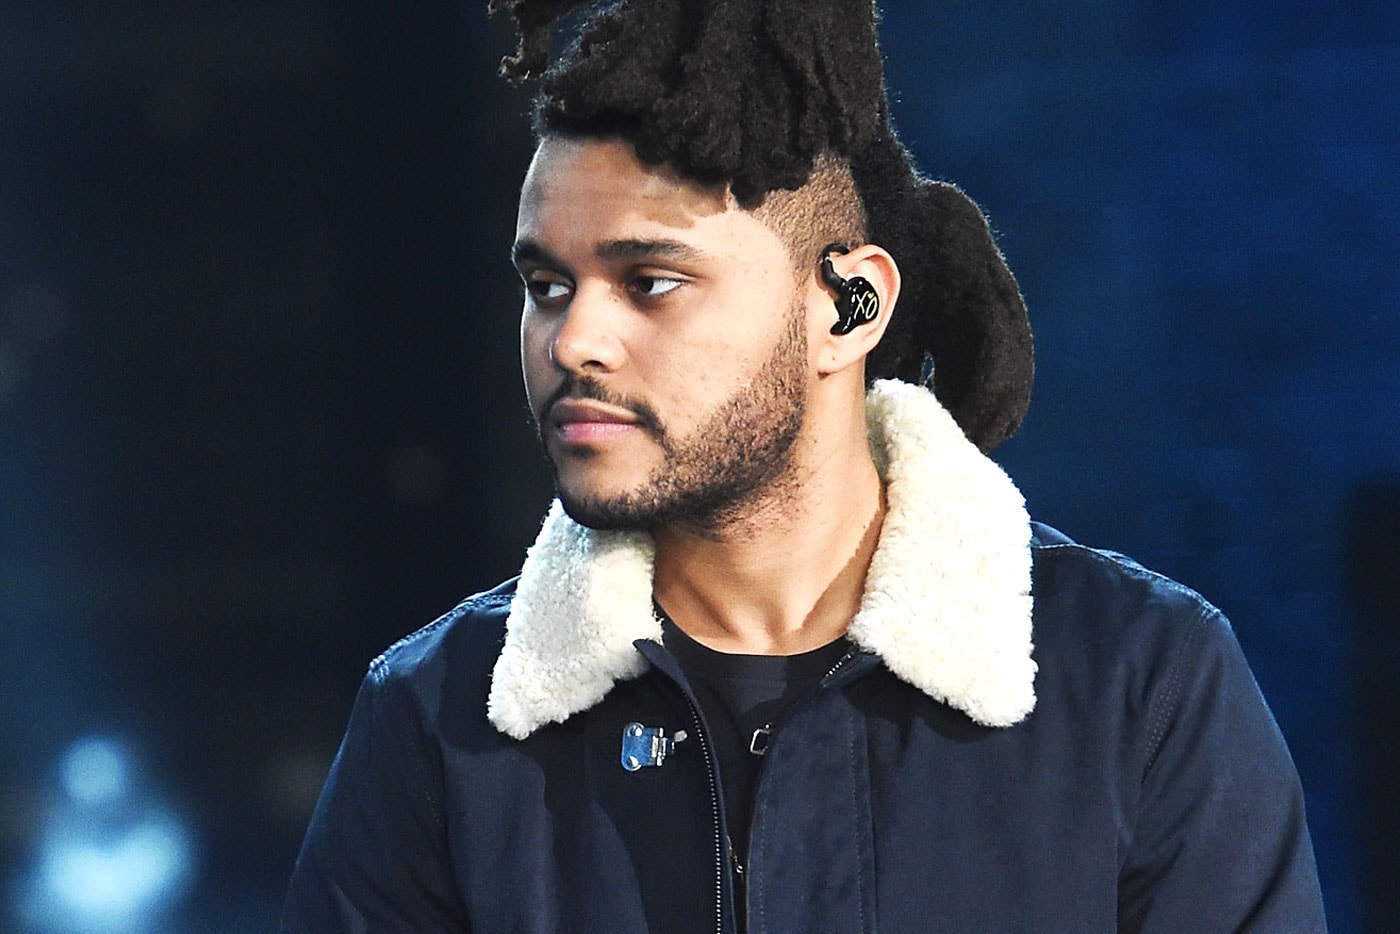 The Weeknd, Rihanna & More to Perform at Victoria's Secret Fashion Show